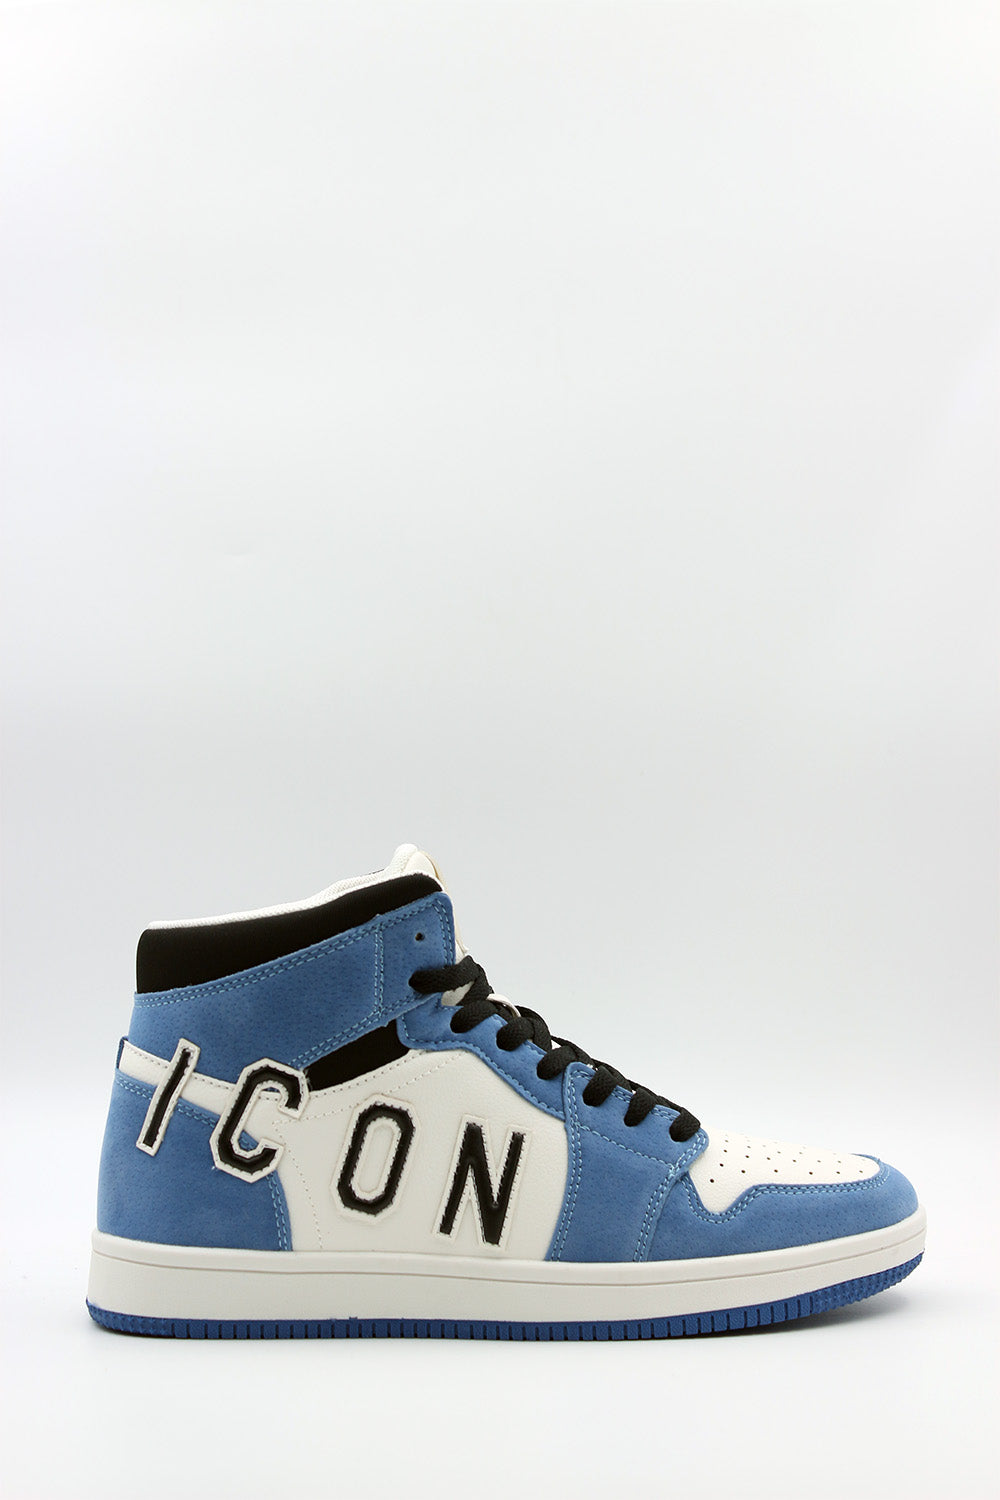 ICON Sneakers